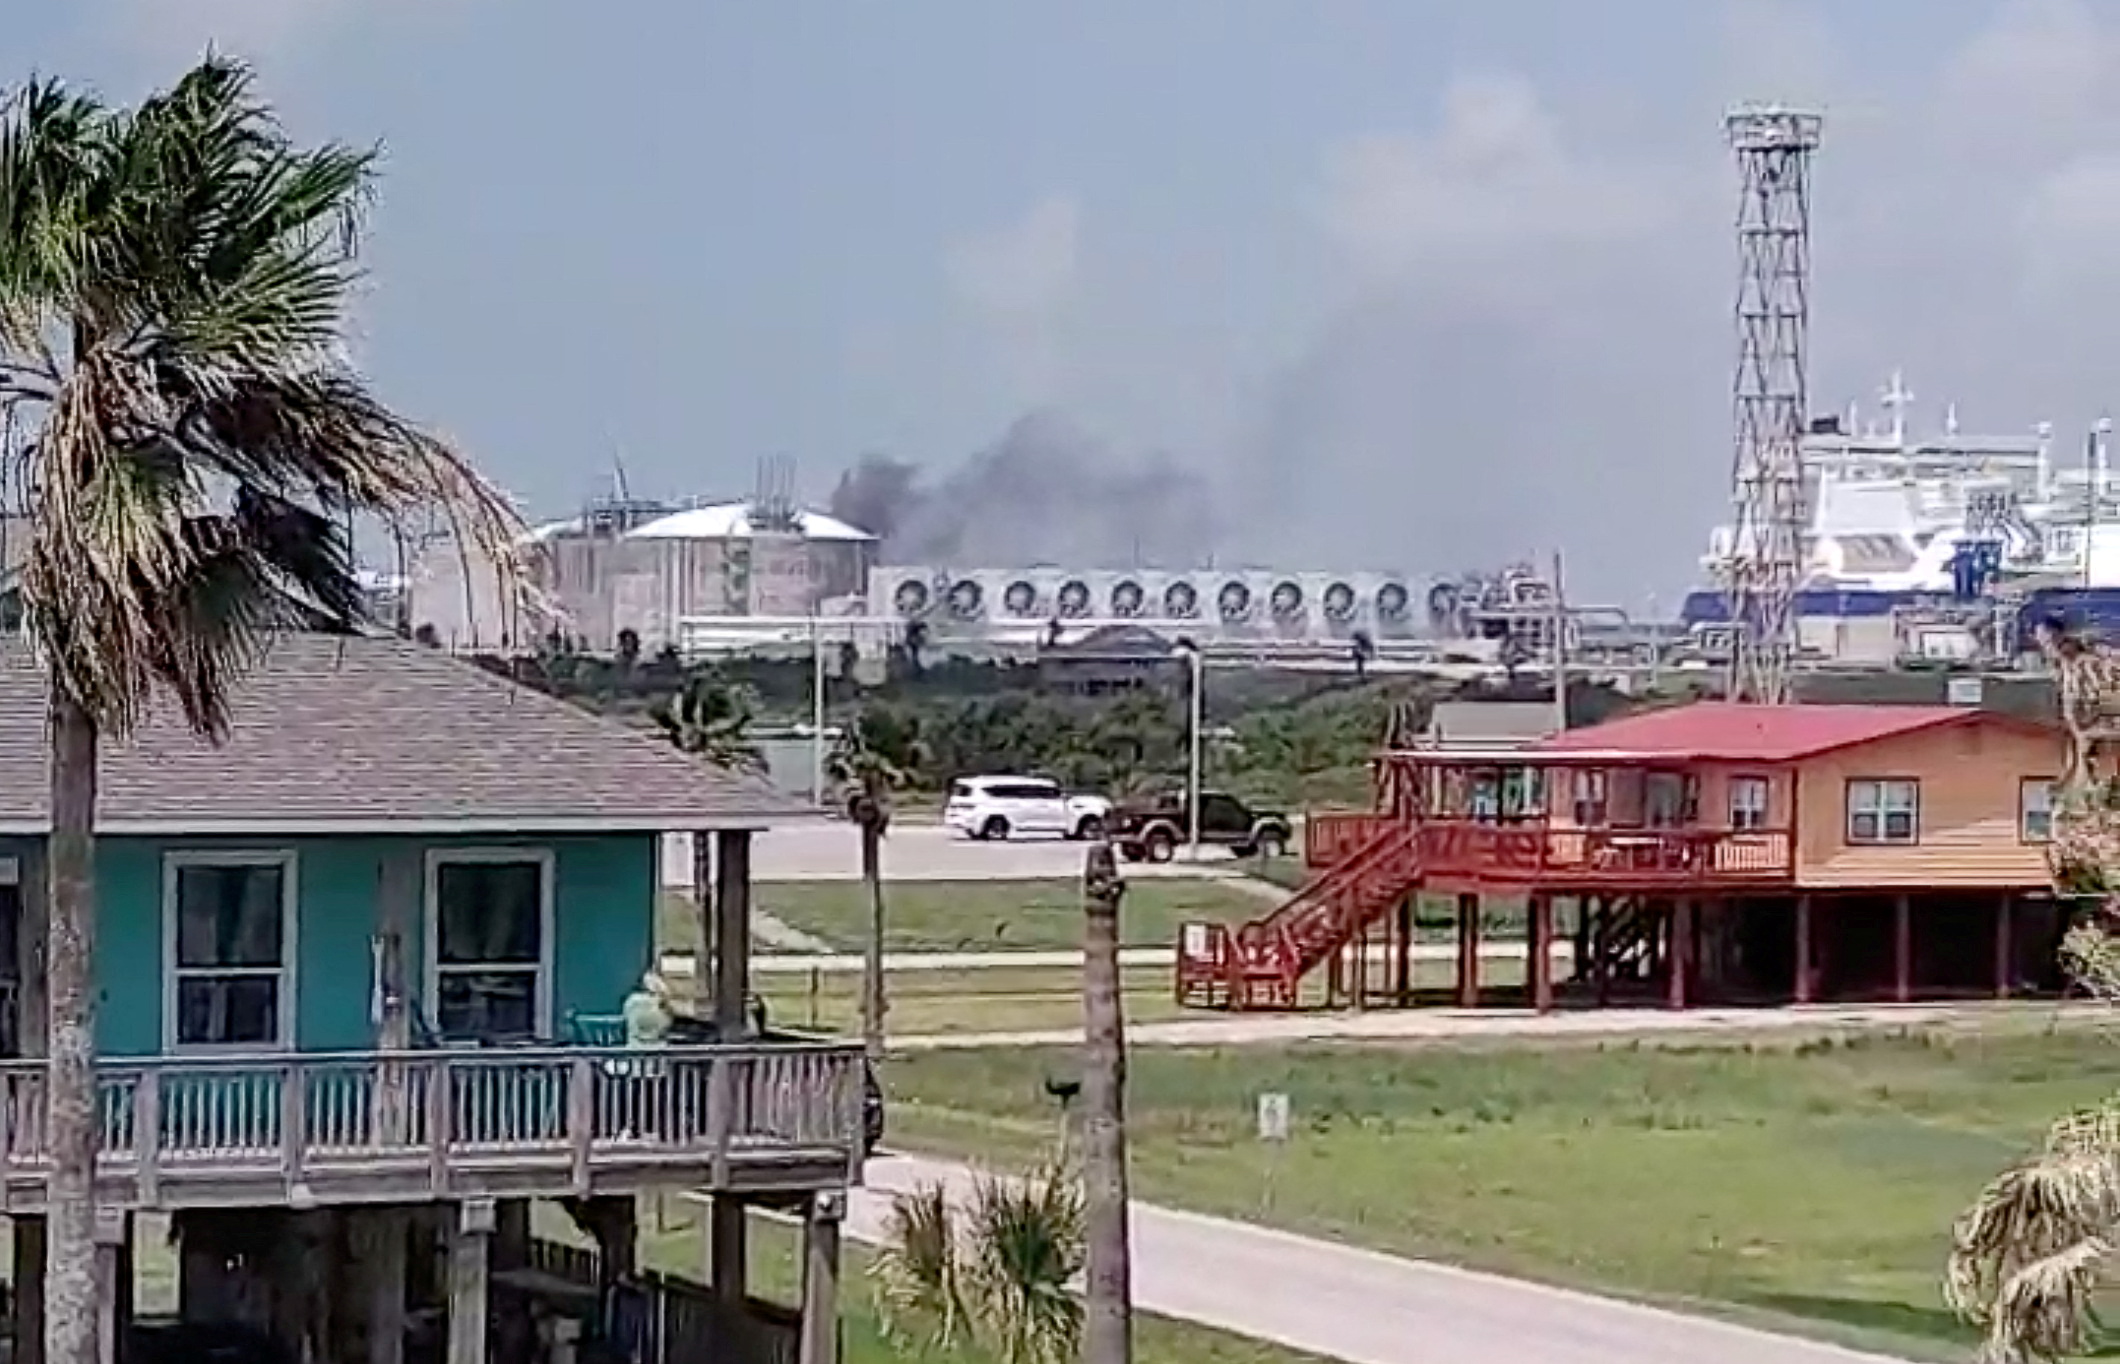 Smoke billows from LNG plant in Quintana, TX